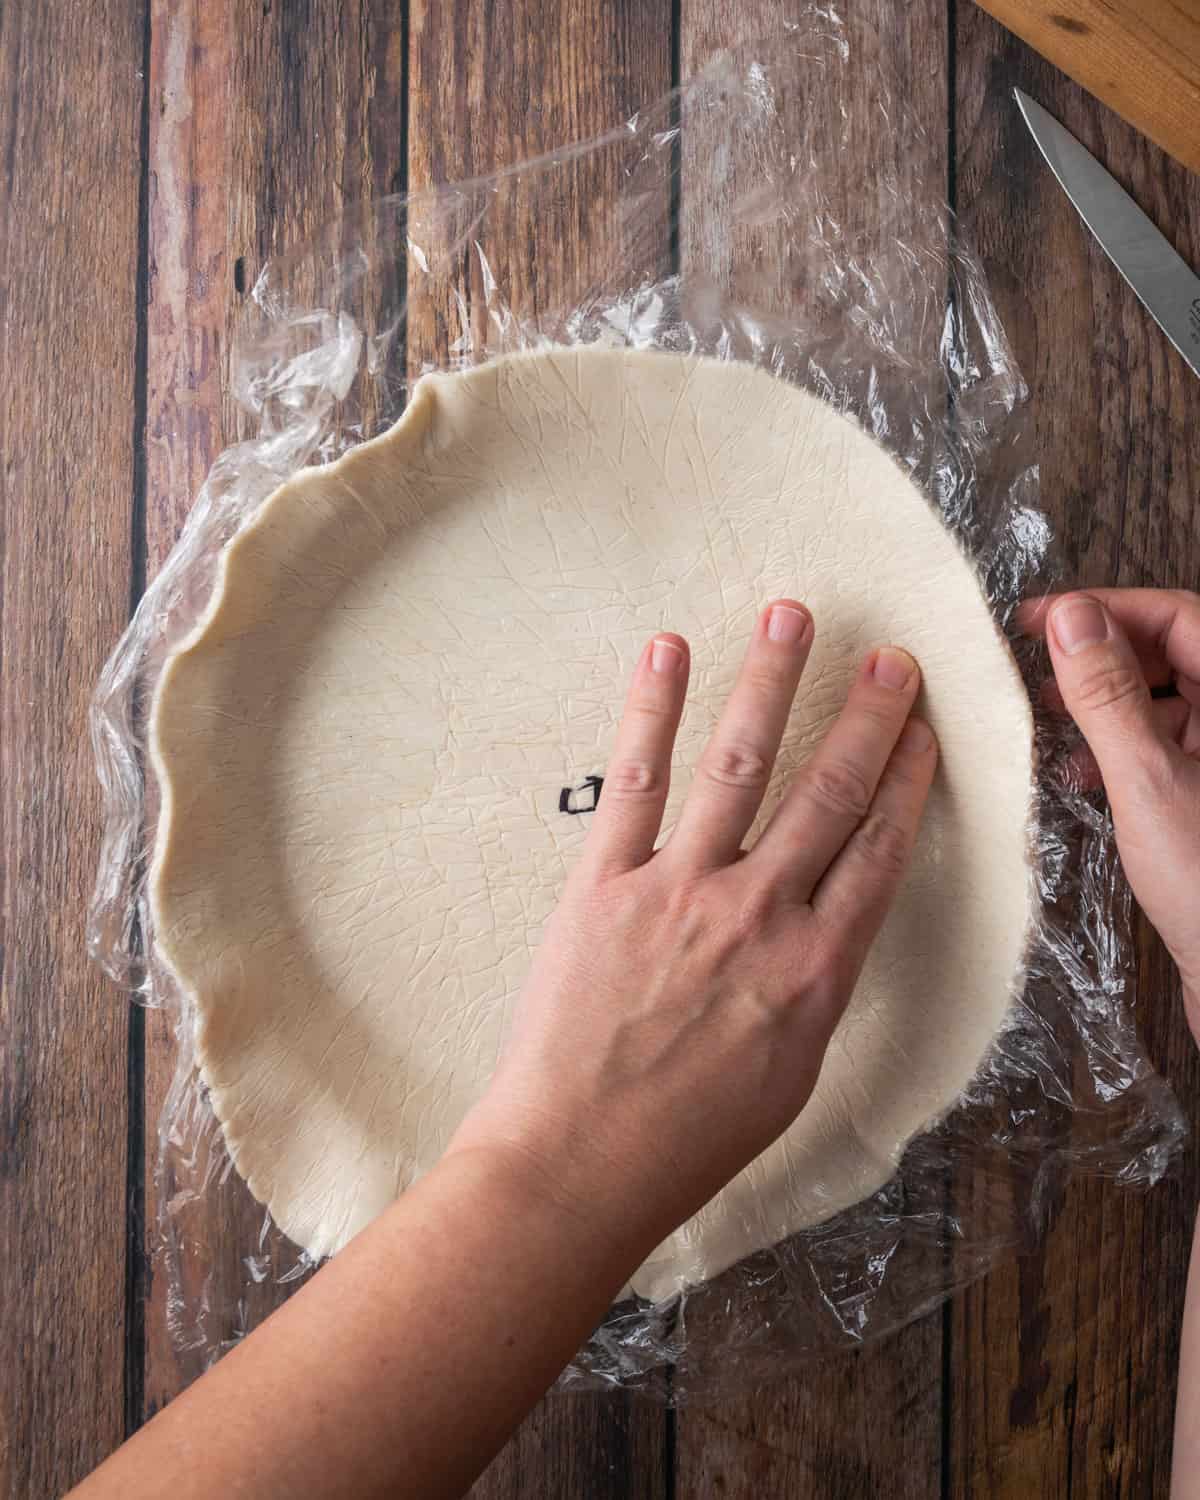 Pie dough being shaped into a pie tin.